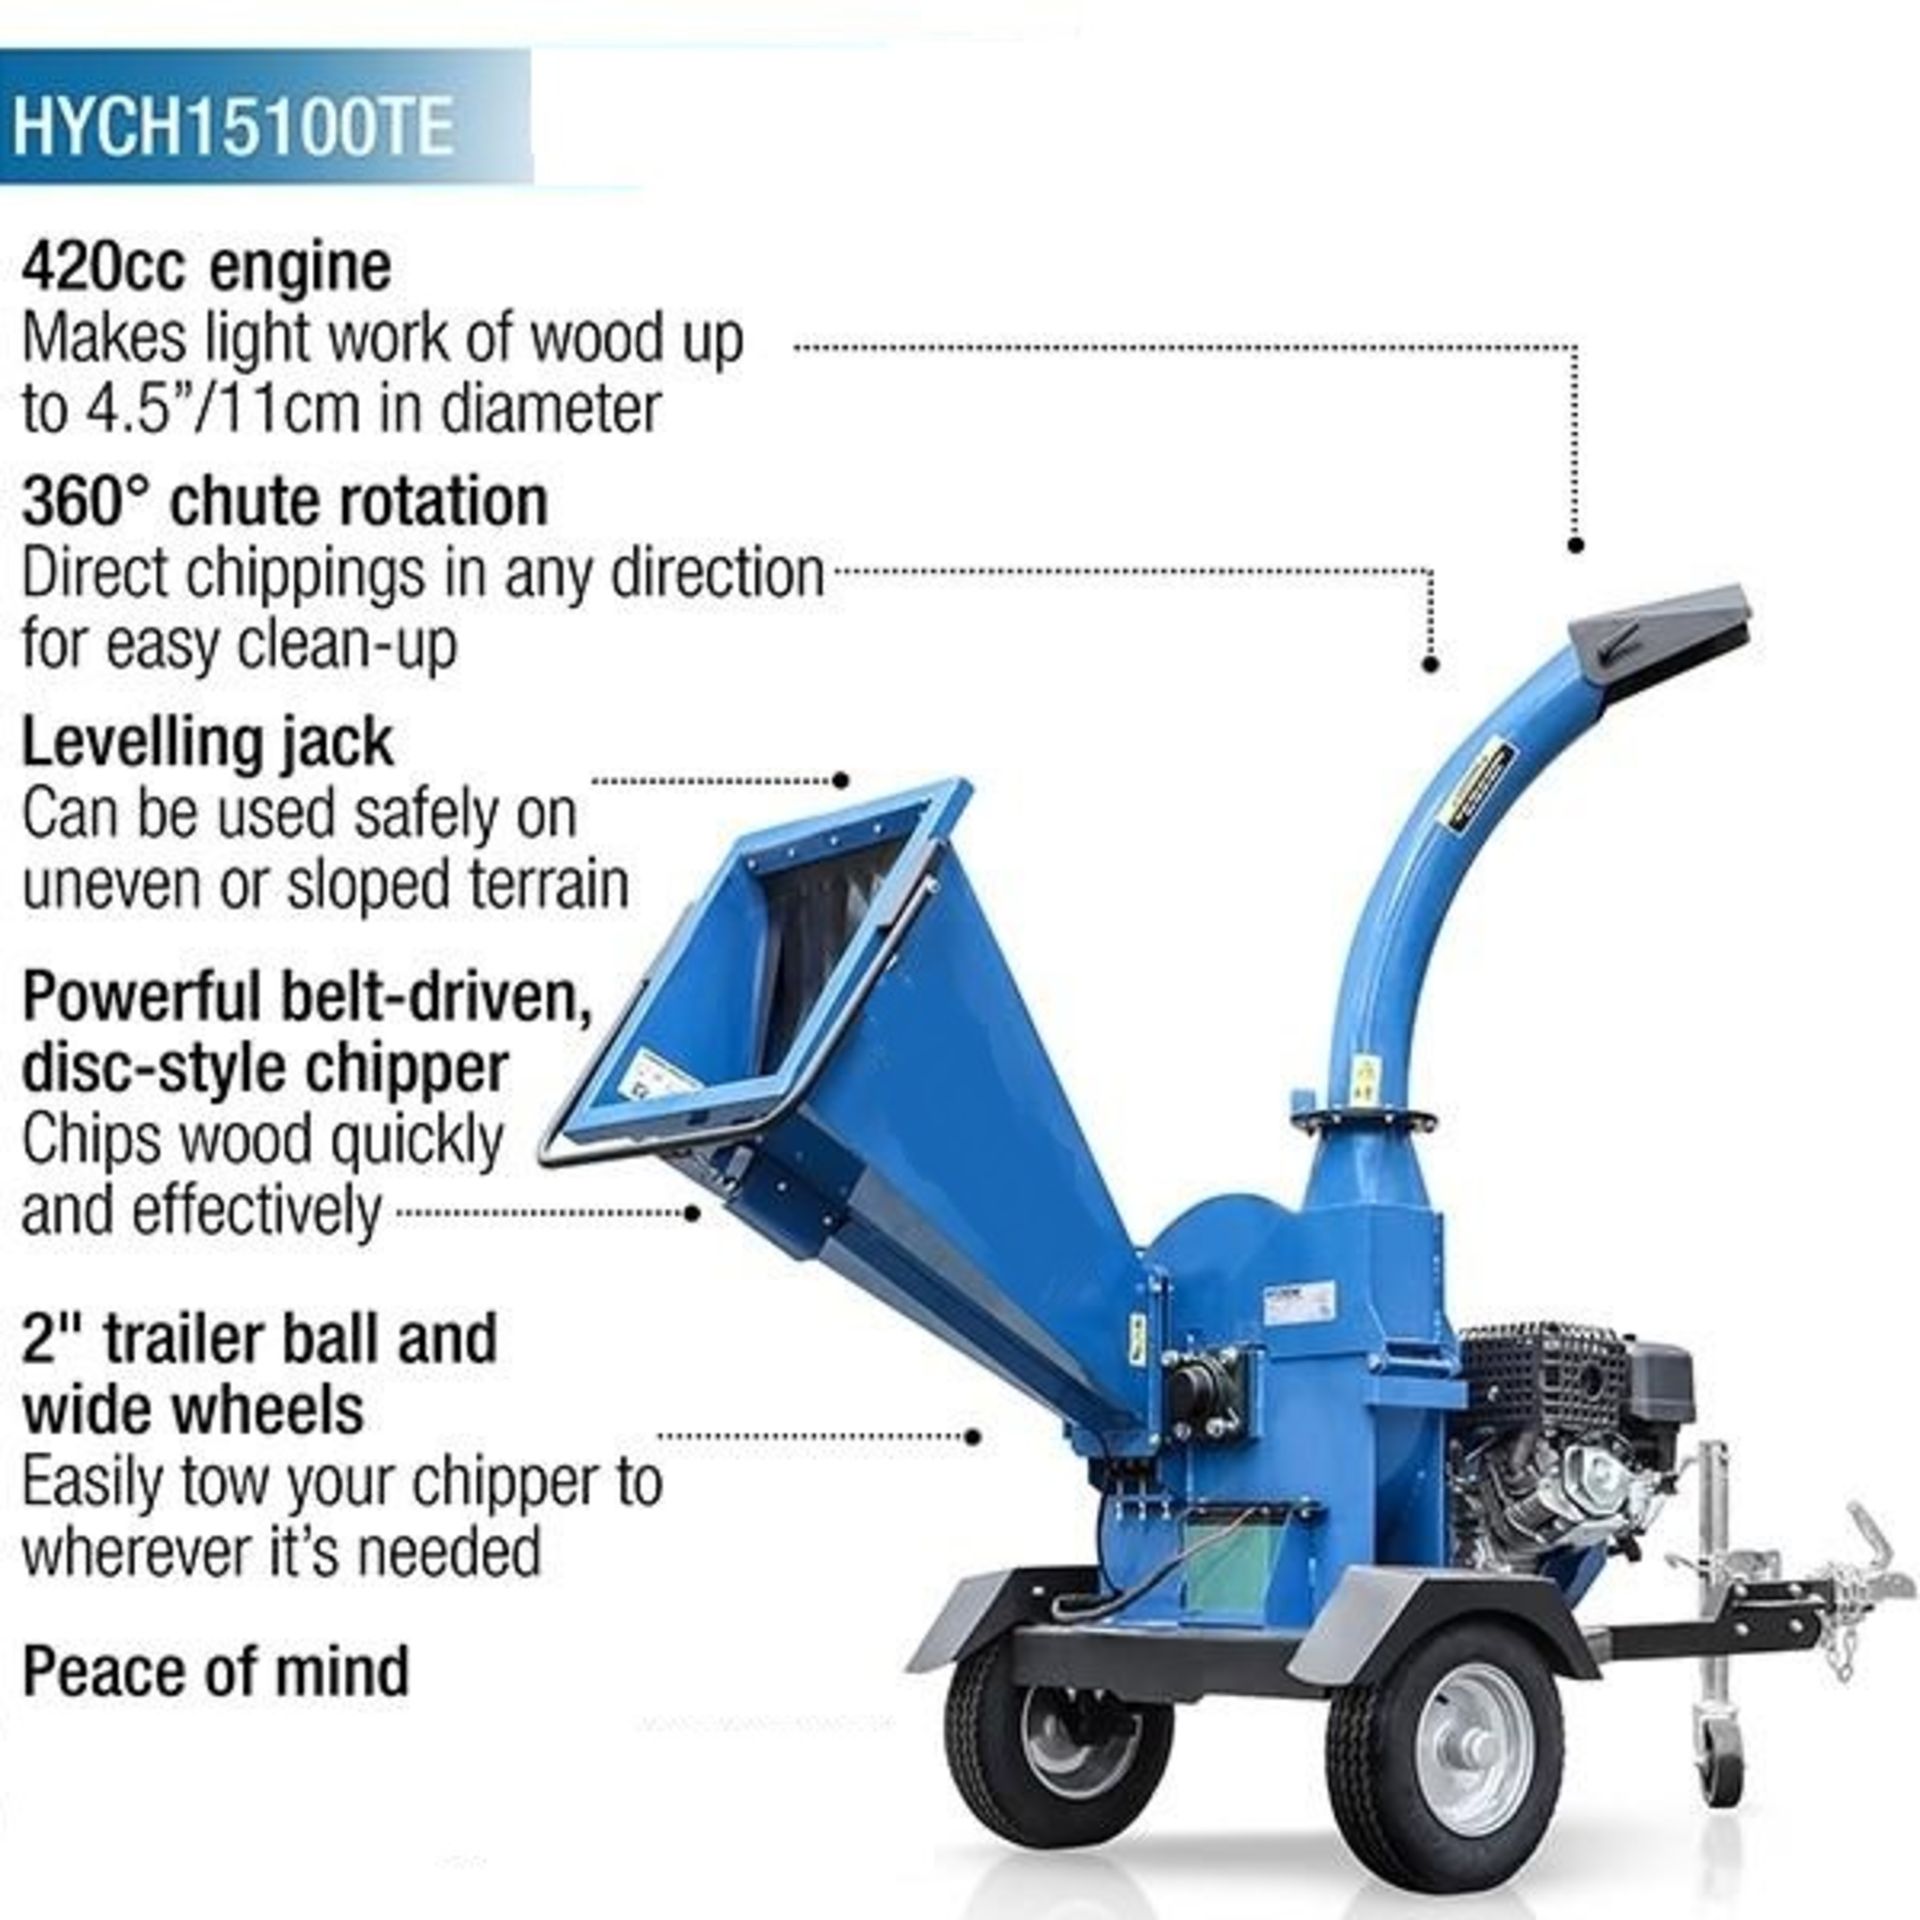 NEW AND UNUSED 15100TE 420cc 4.5" TOWABLE PETROL WOOD CHIPPER, RRP OVER £2400 *PLUS VAT* - Image 3 of 5